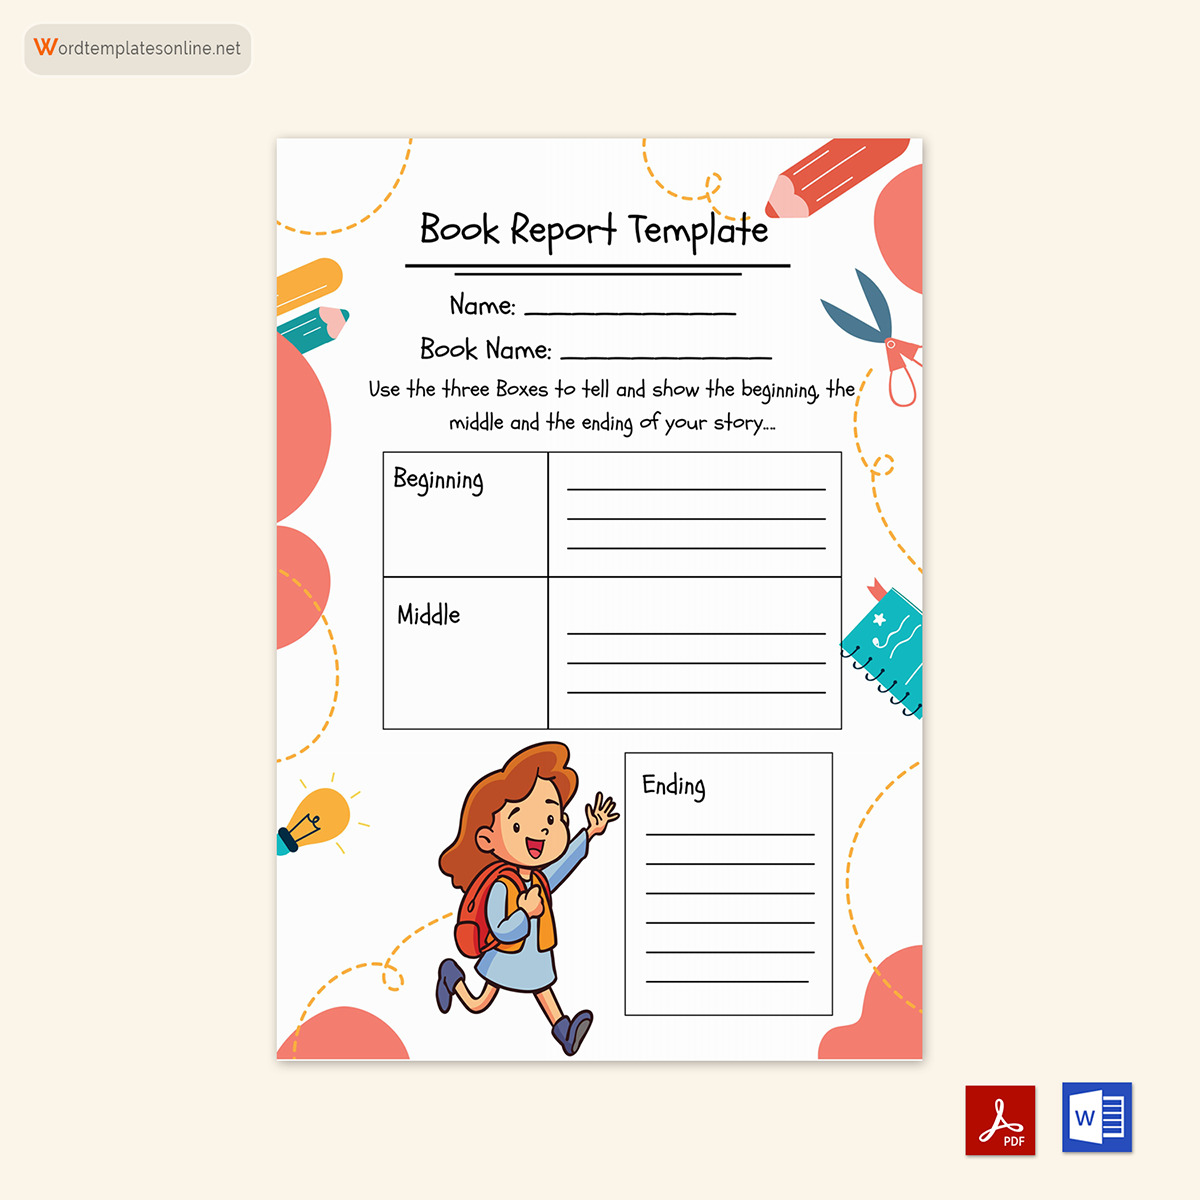 Word Book Report Template: Free and Editable